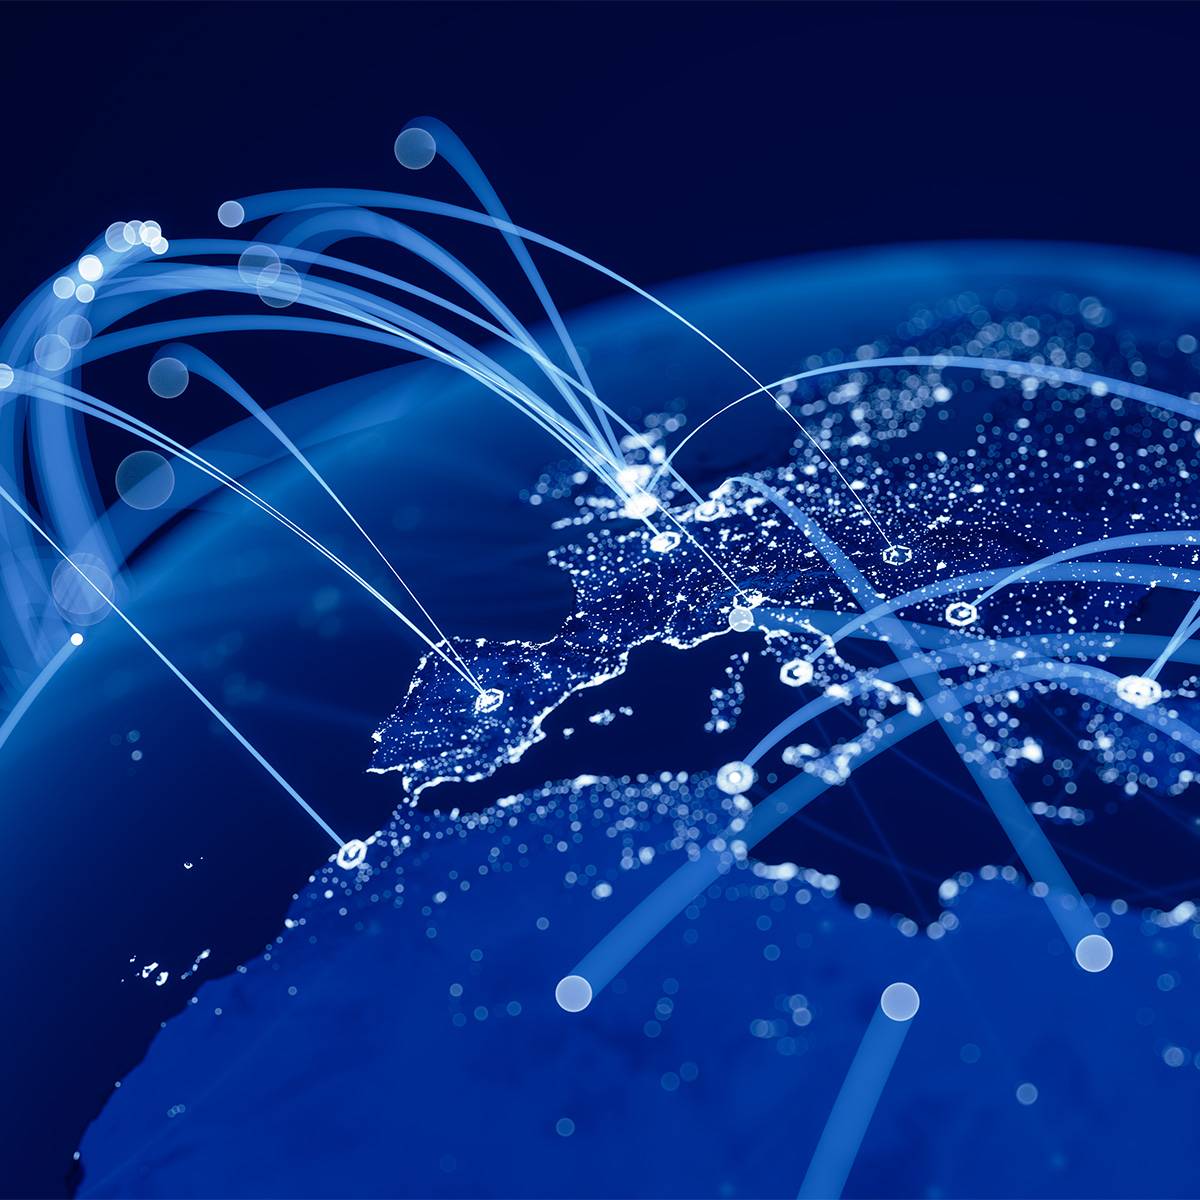 A visualisation of global communications networks.